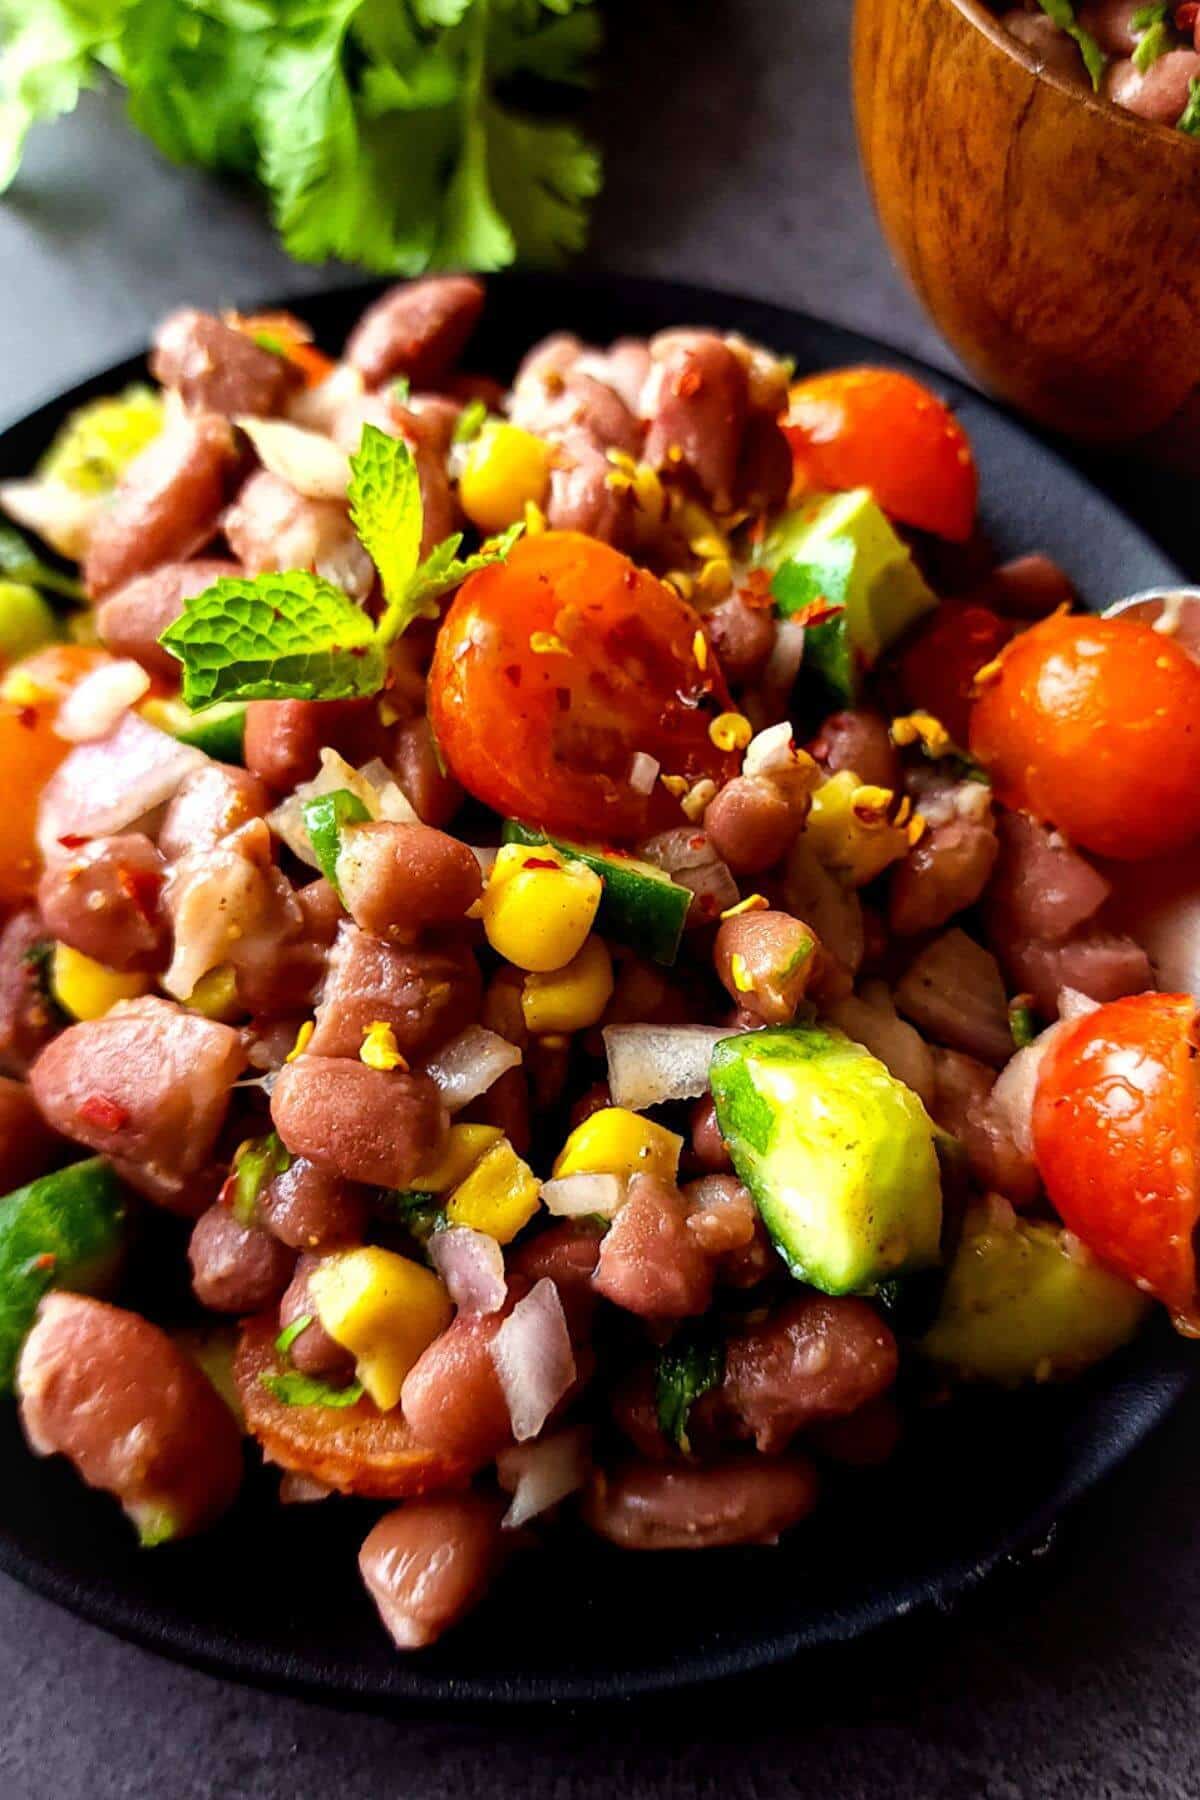 Spicy Indian kidney bean salad served on a black plate.